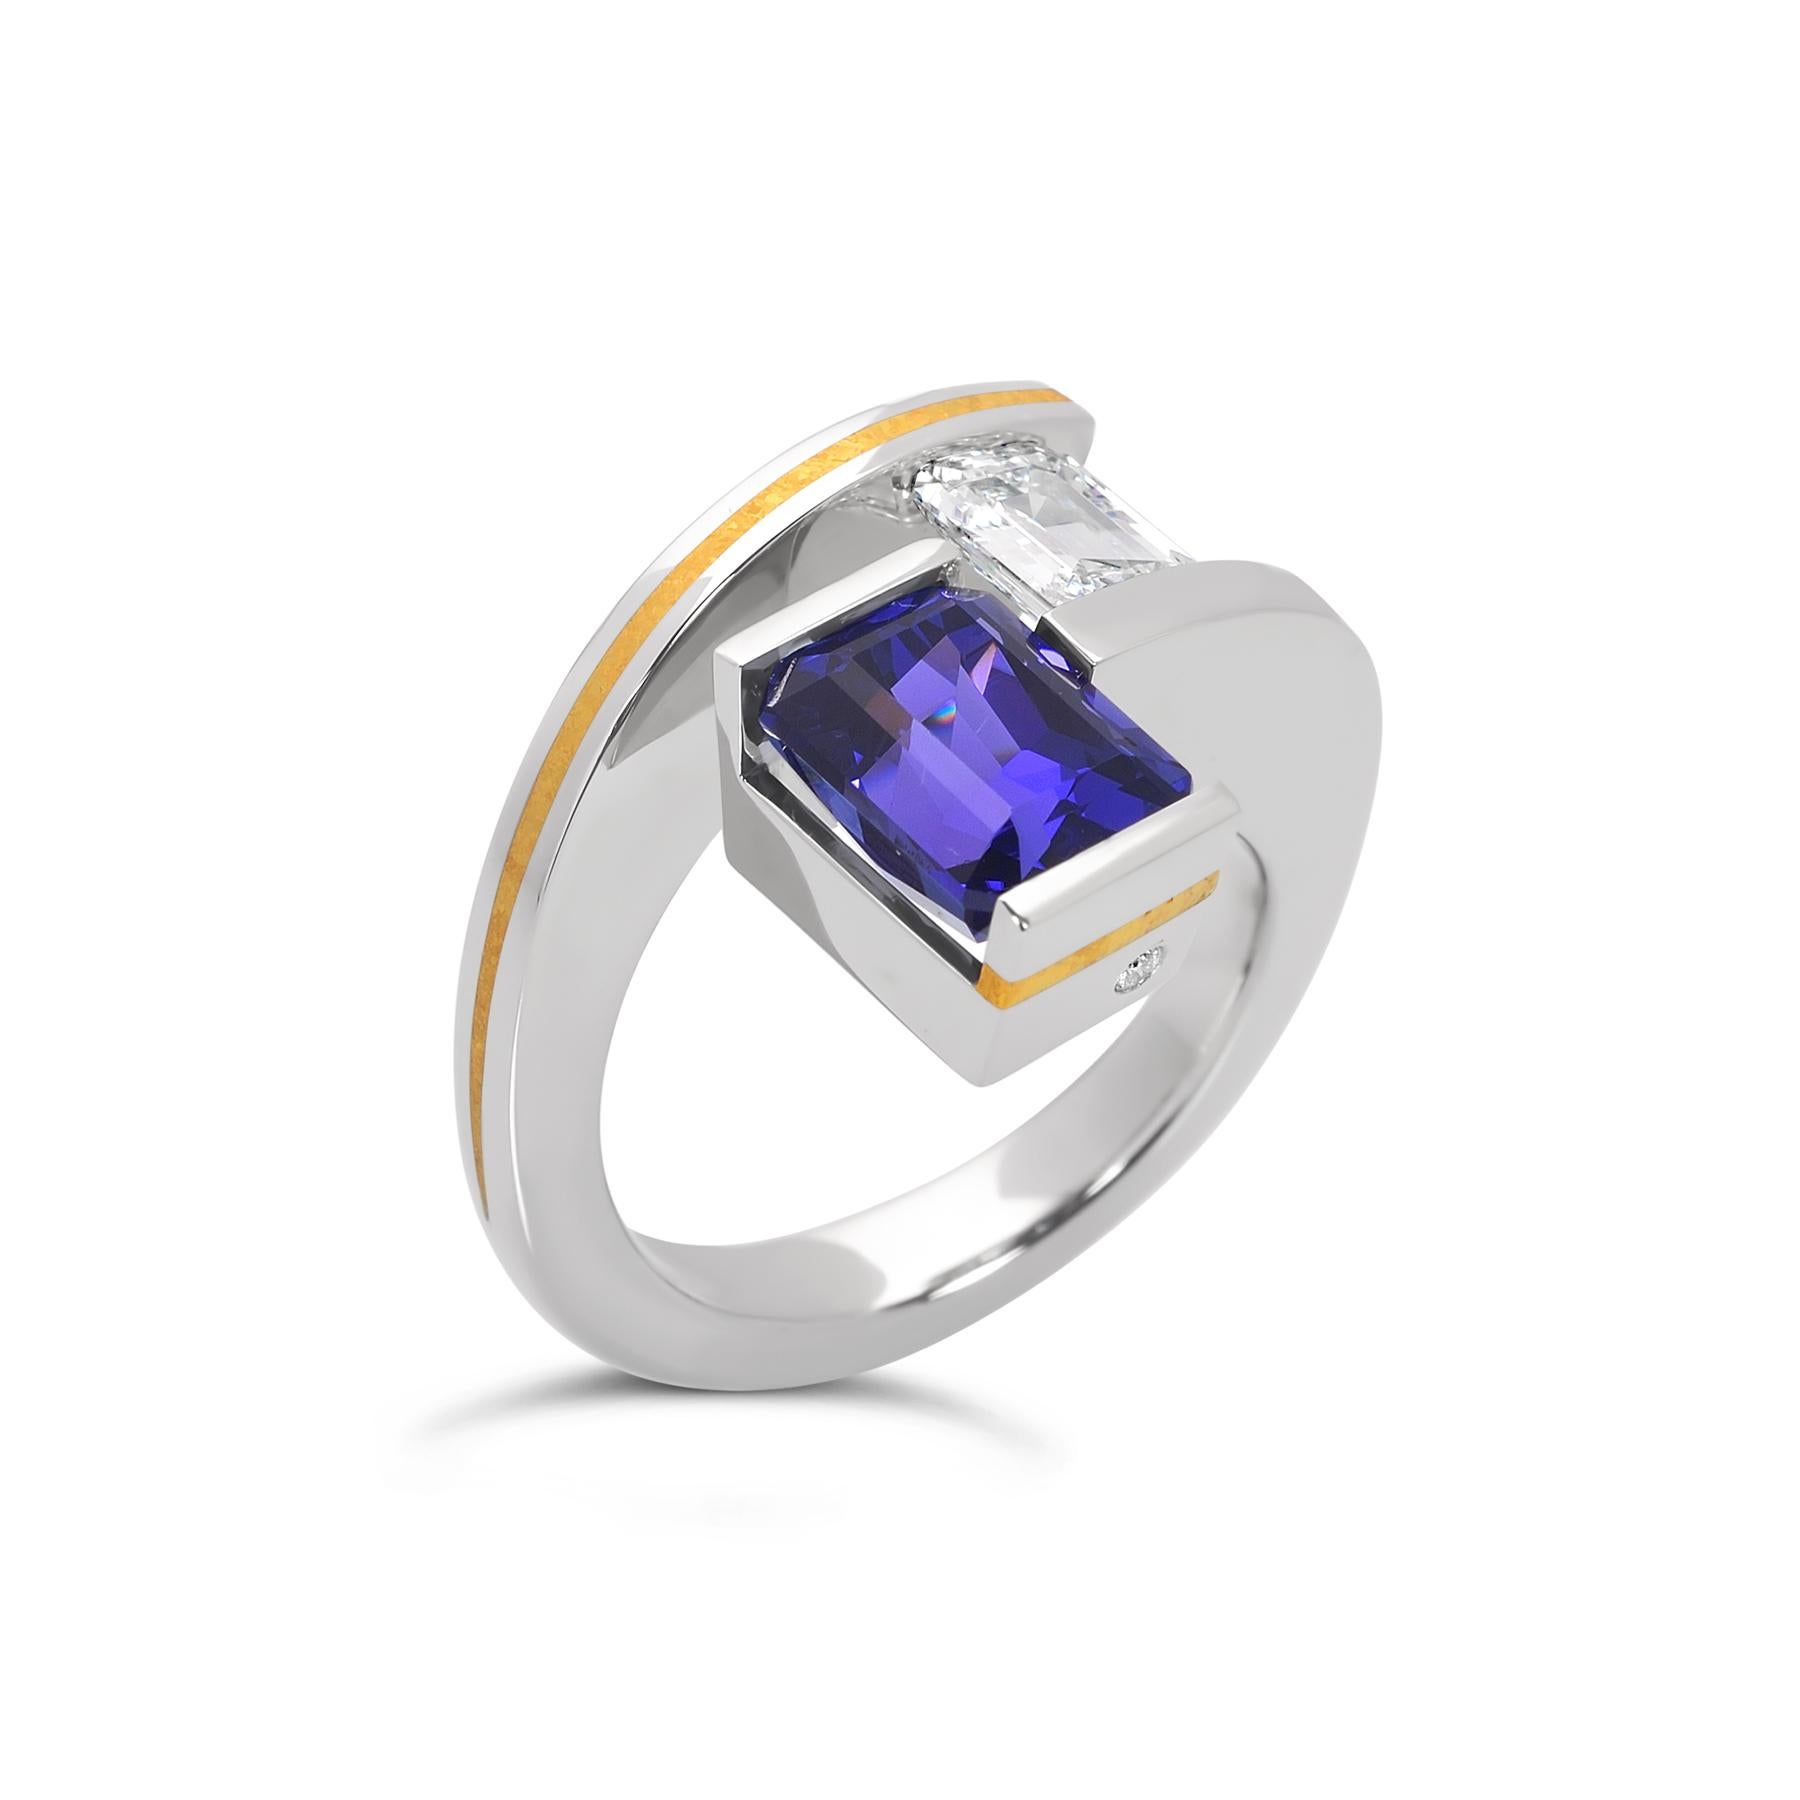 The 2-Stone Helix Ring with tanzanite and diamond is handcrafted in platinum with custom 24k crystalized gold inlay accents. The ring features a 3.61 ct. deep blue-purple tanzanite and a tension-set 0.78 ct. E/VS2 emerald cut diamond (GIA